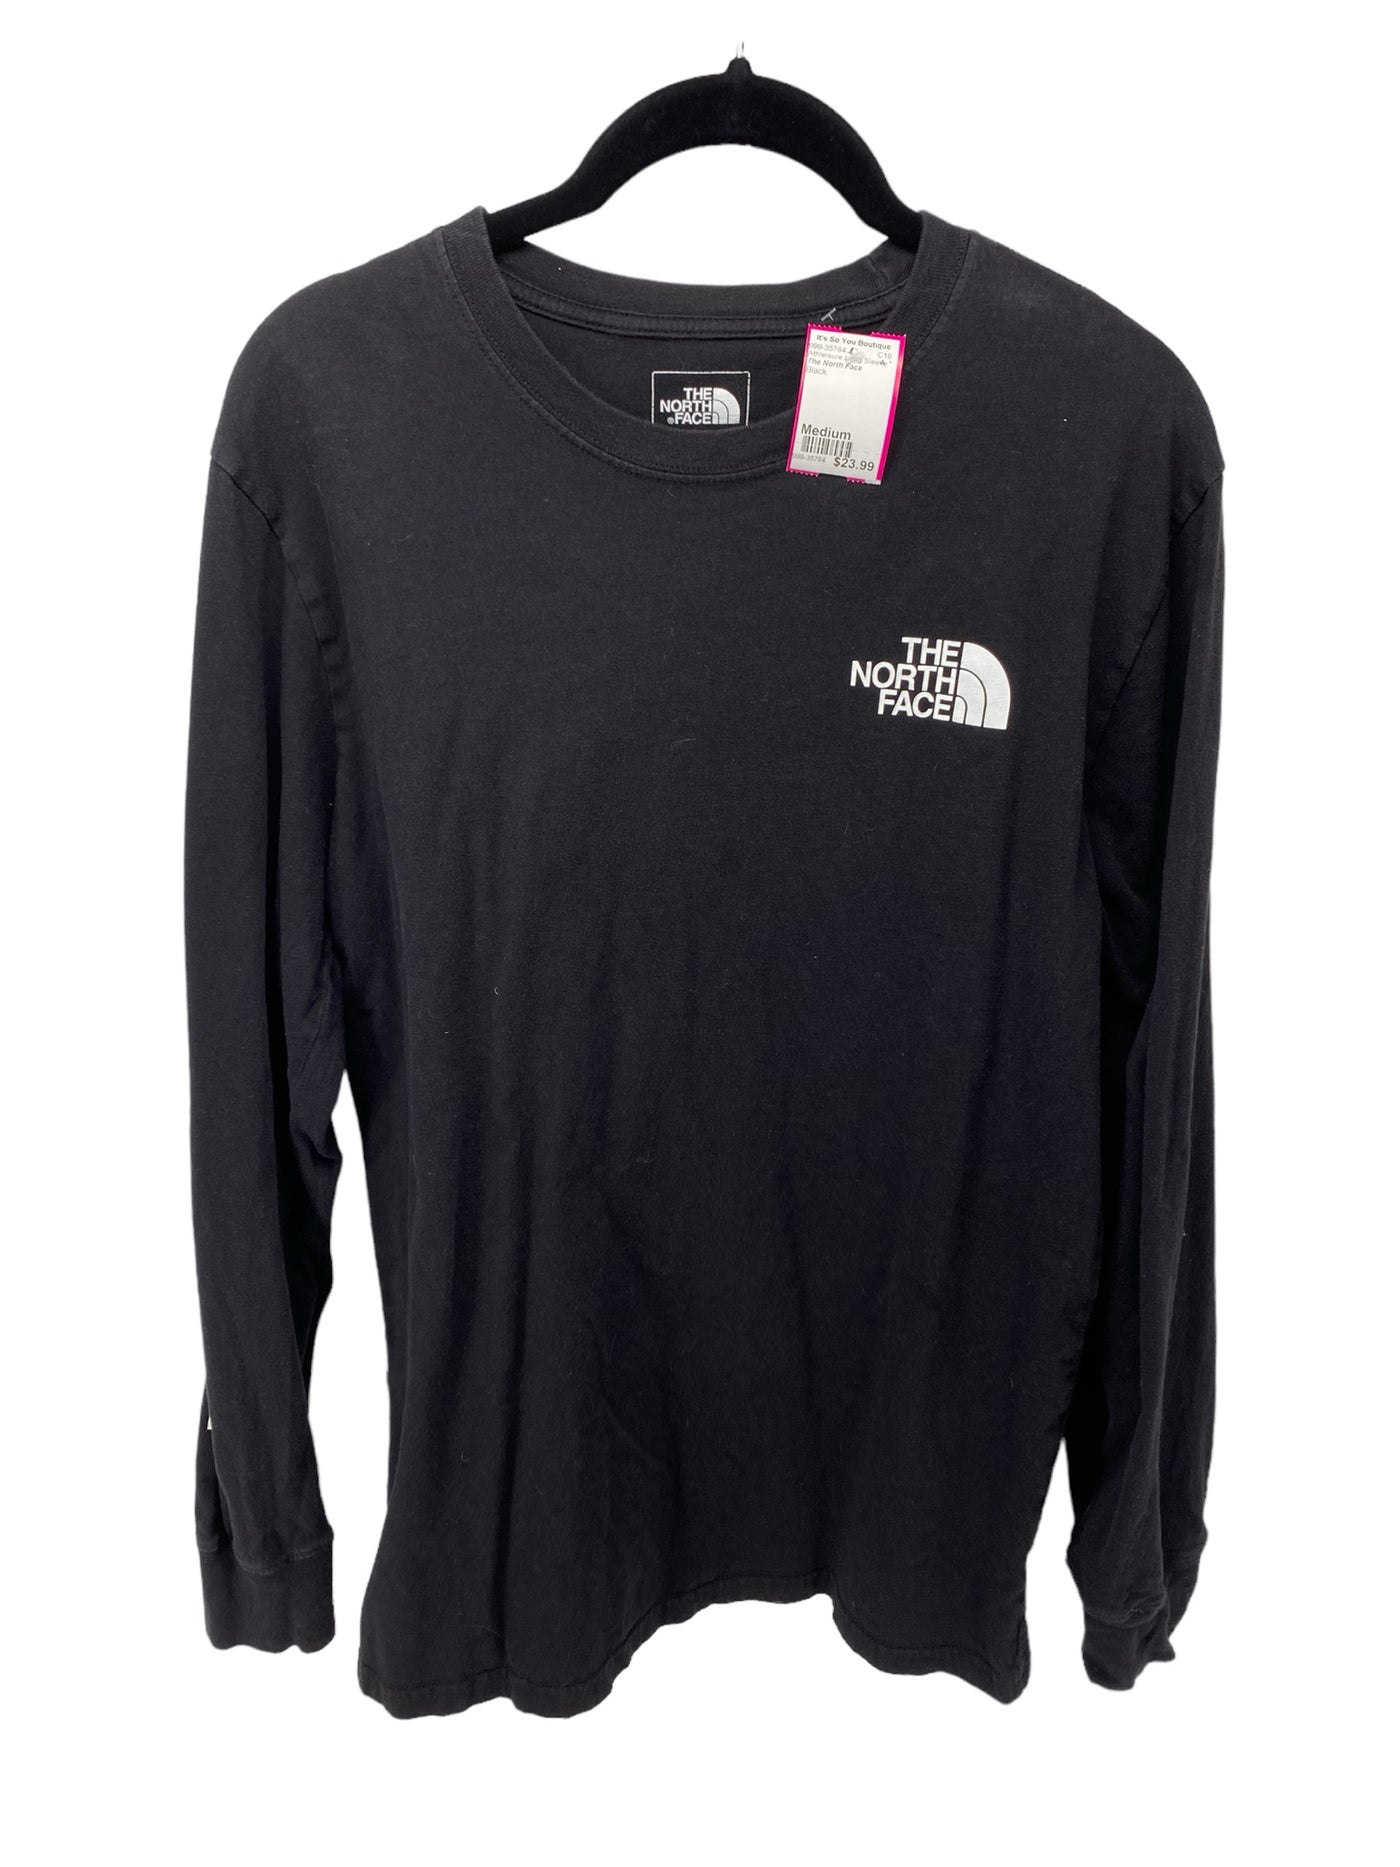 The North Face Misses Size Medium Black Athleisure Long Sleeve